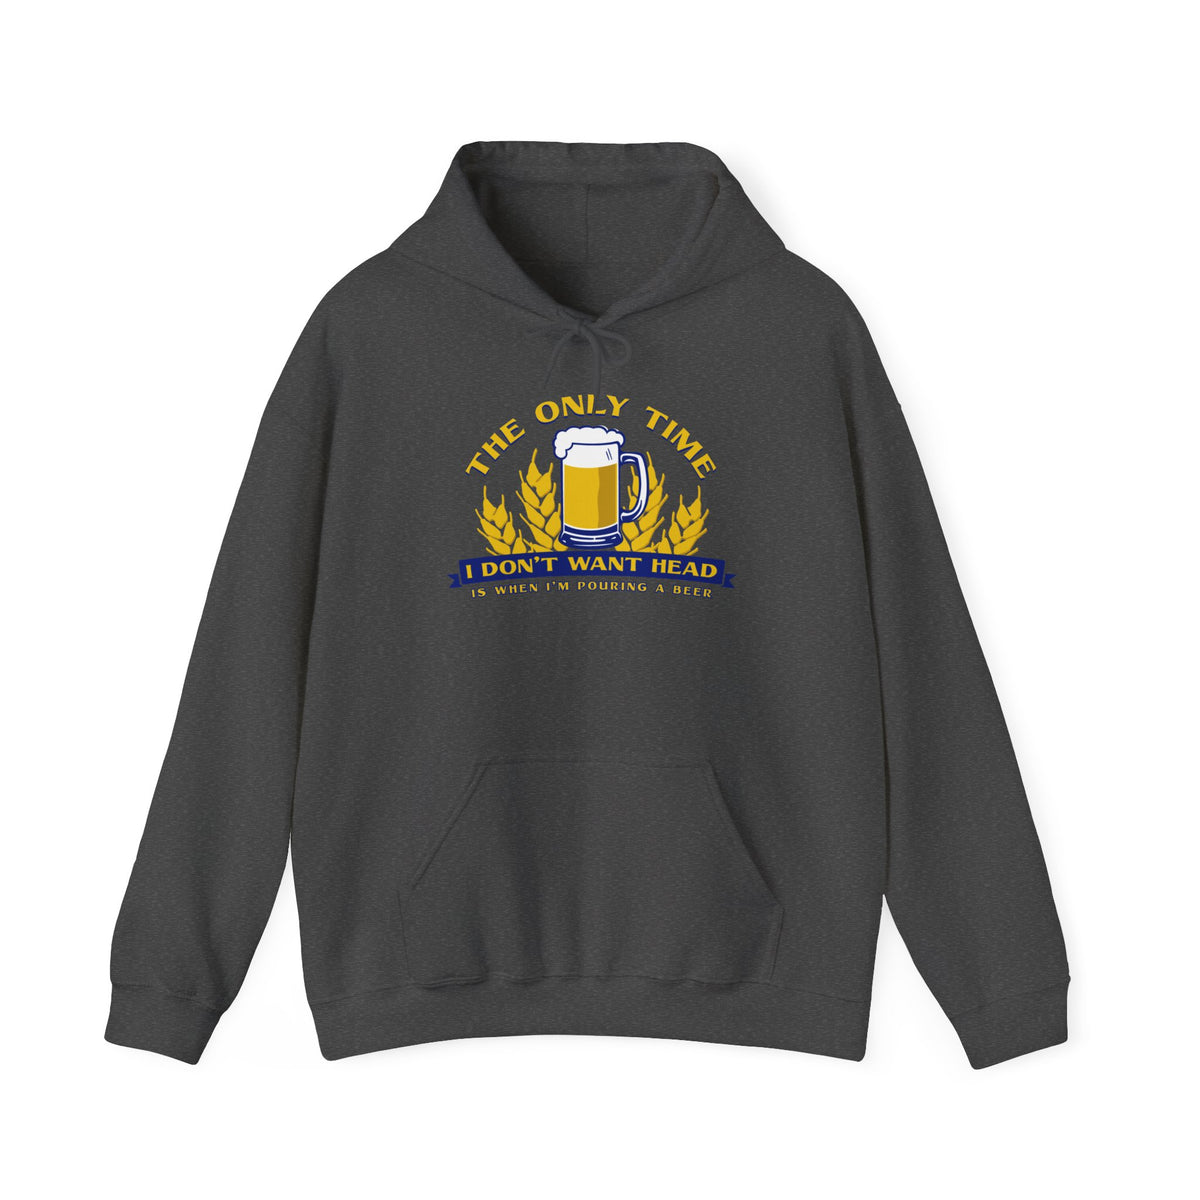 The Only Time I Don't Want Head Is When I'm Pouring A Beer - Hoodie